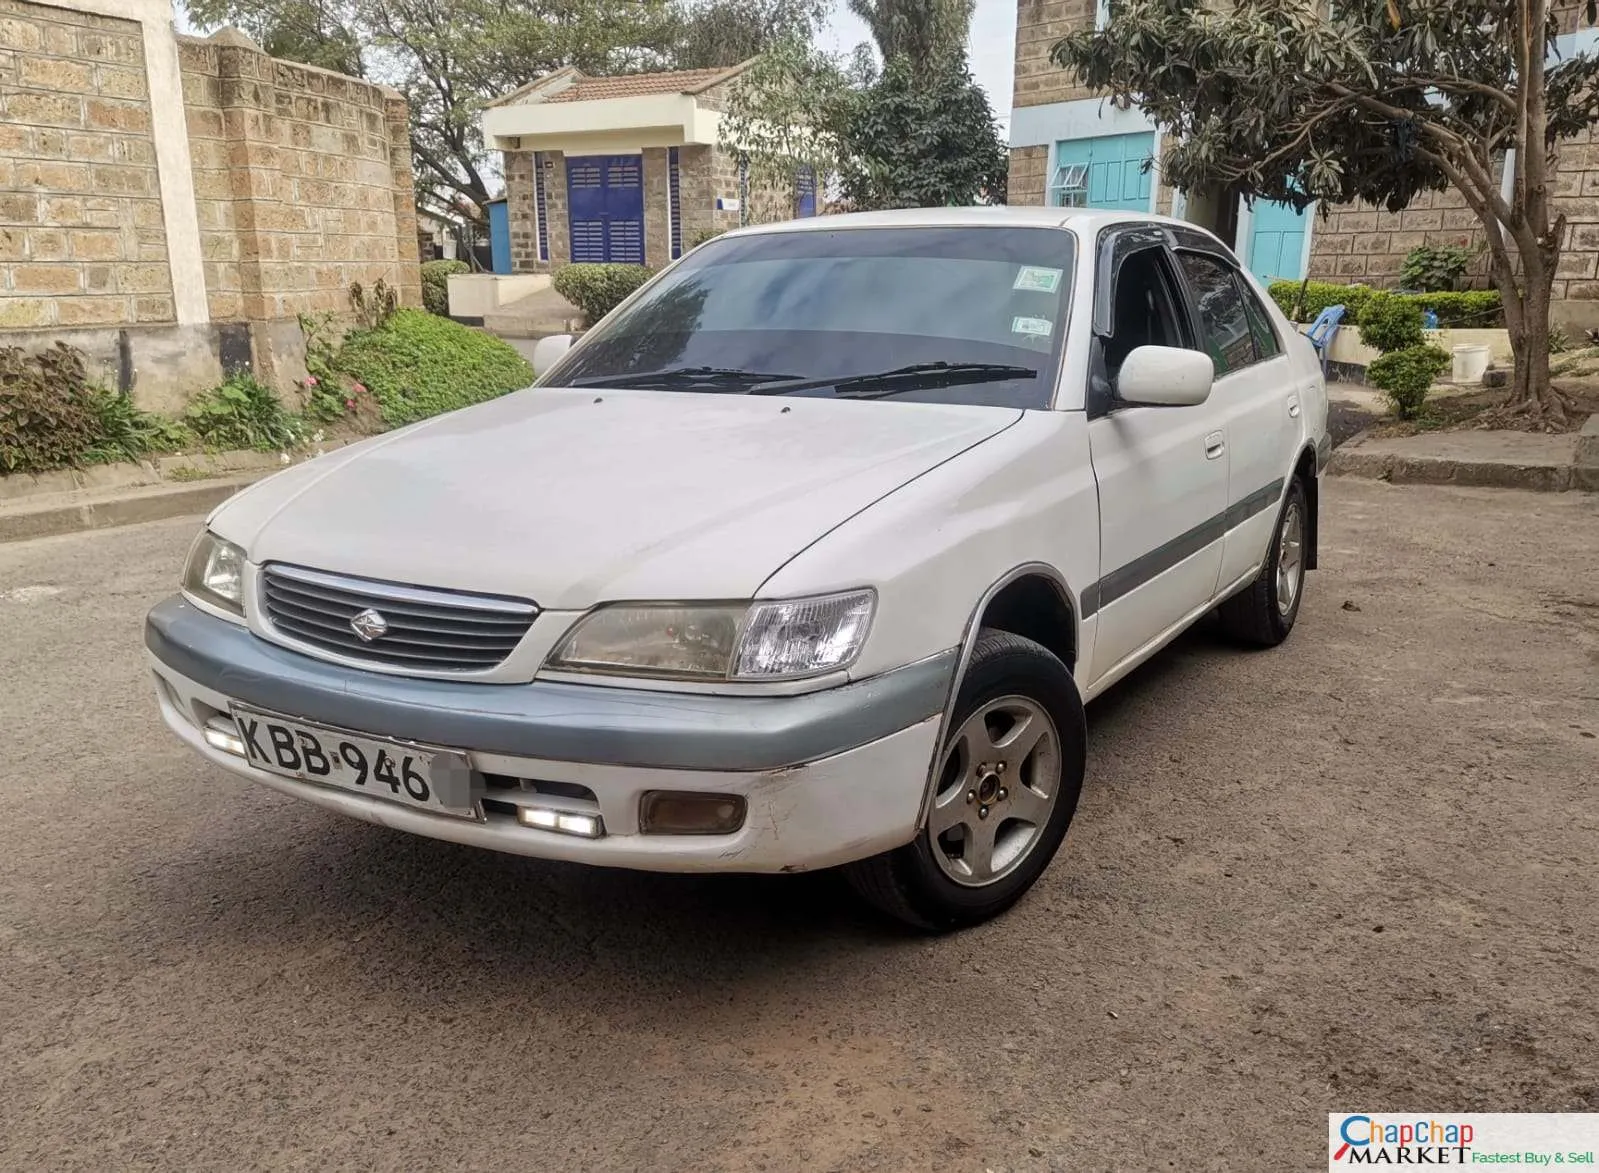 Toyota Premio nyoka QUICK SALE You pay 20% Deposit Trade in Ok Premio for sale in kenya hire purchase installments EXCLUSIVE